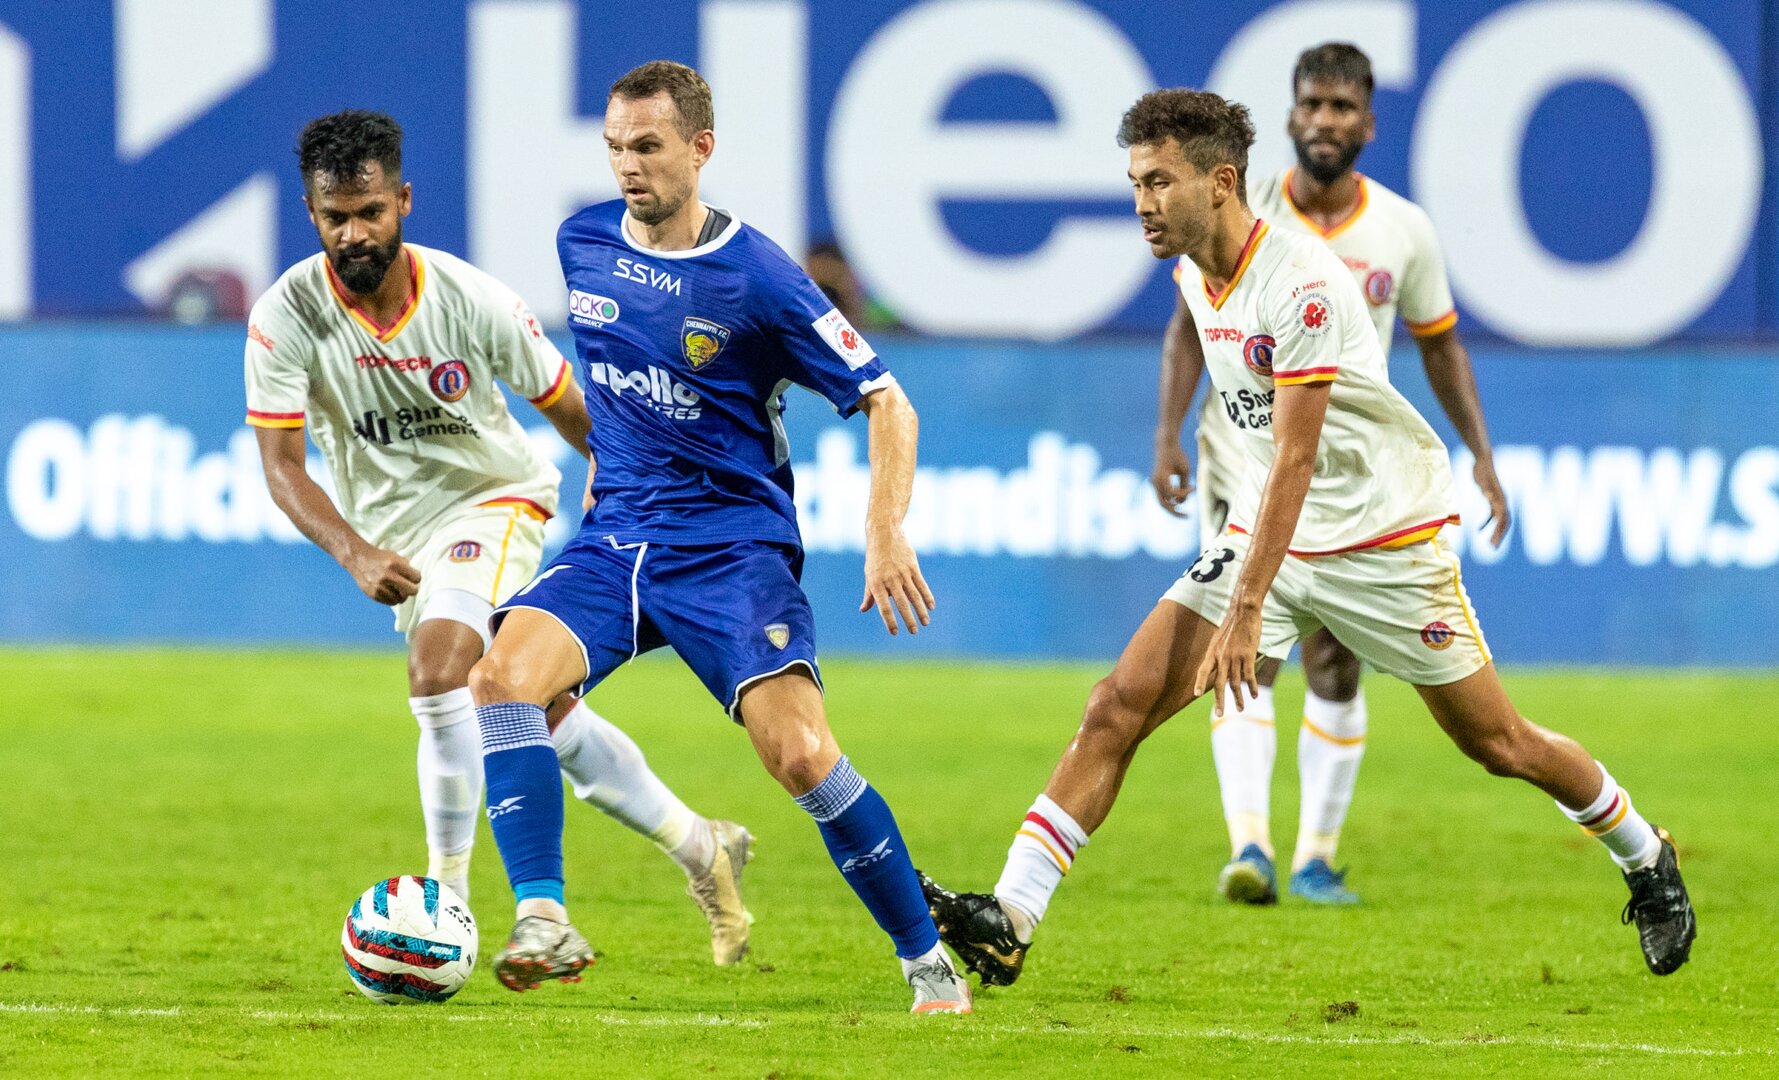 SCEB vs CFC: Chennaiyin FC aim to get back to winning ways against wooden spooners SC East Bengal